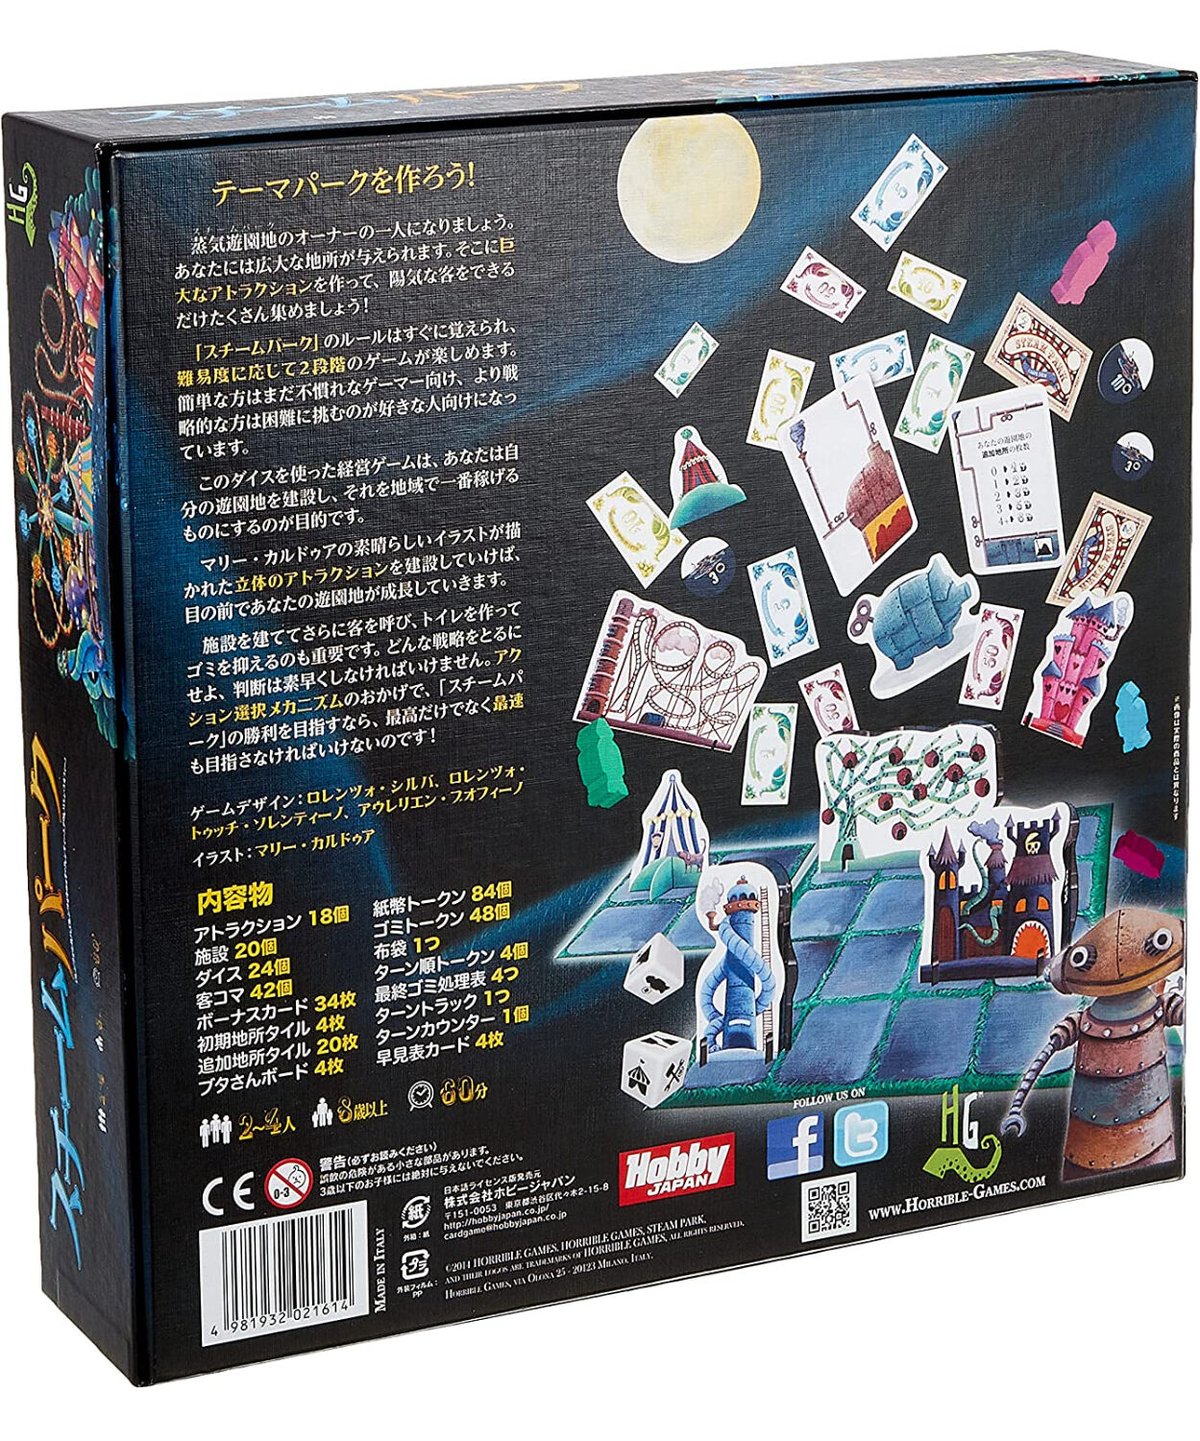 in　スチームパーク　boys　boardgame　the　band